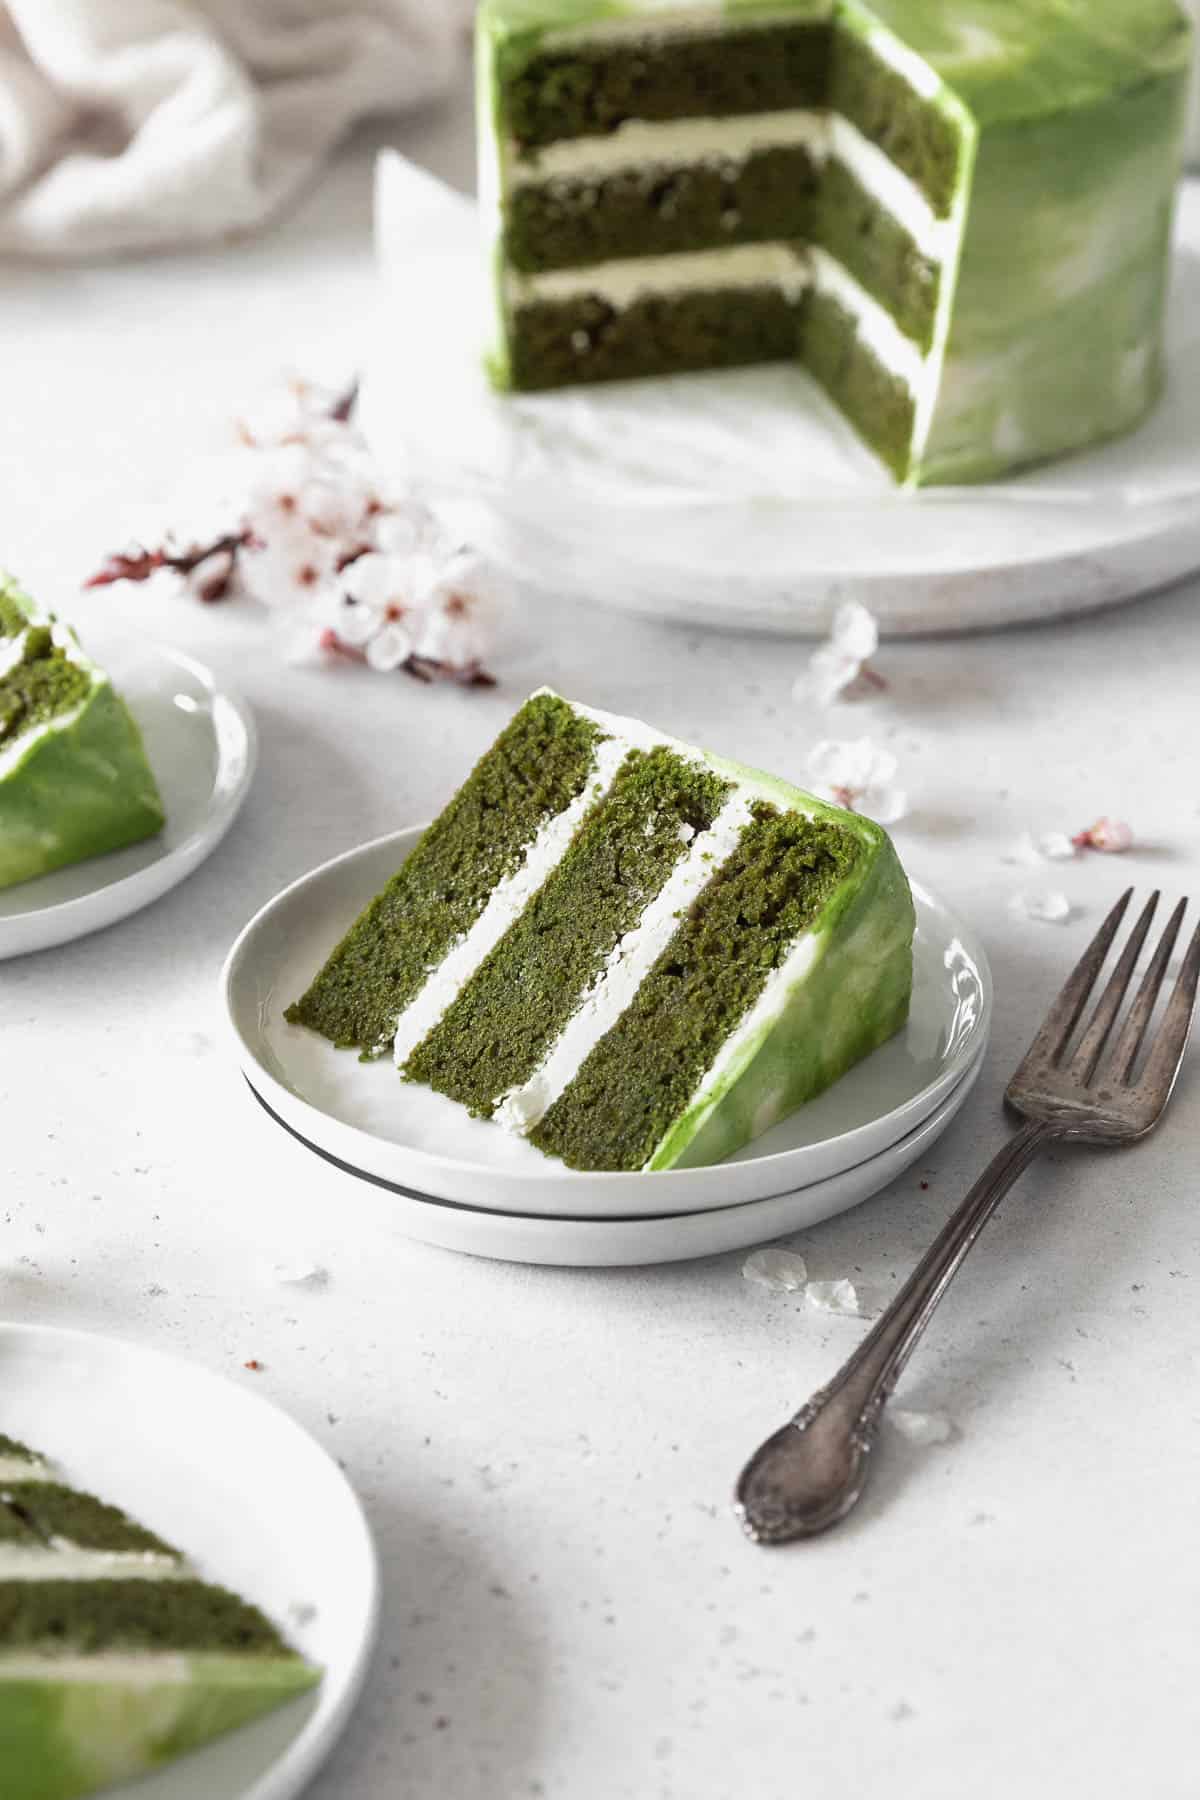 A piece of matcha cake on a white dessert plate next to a fork.